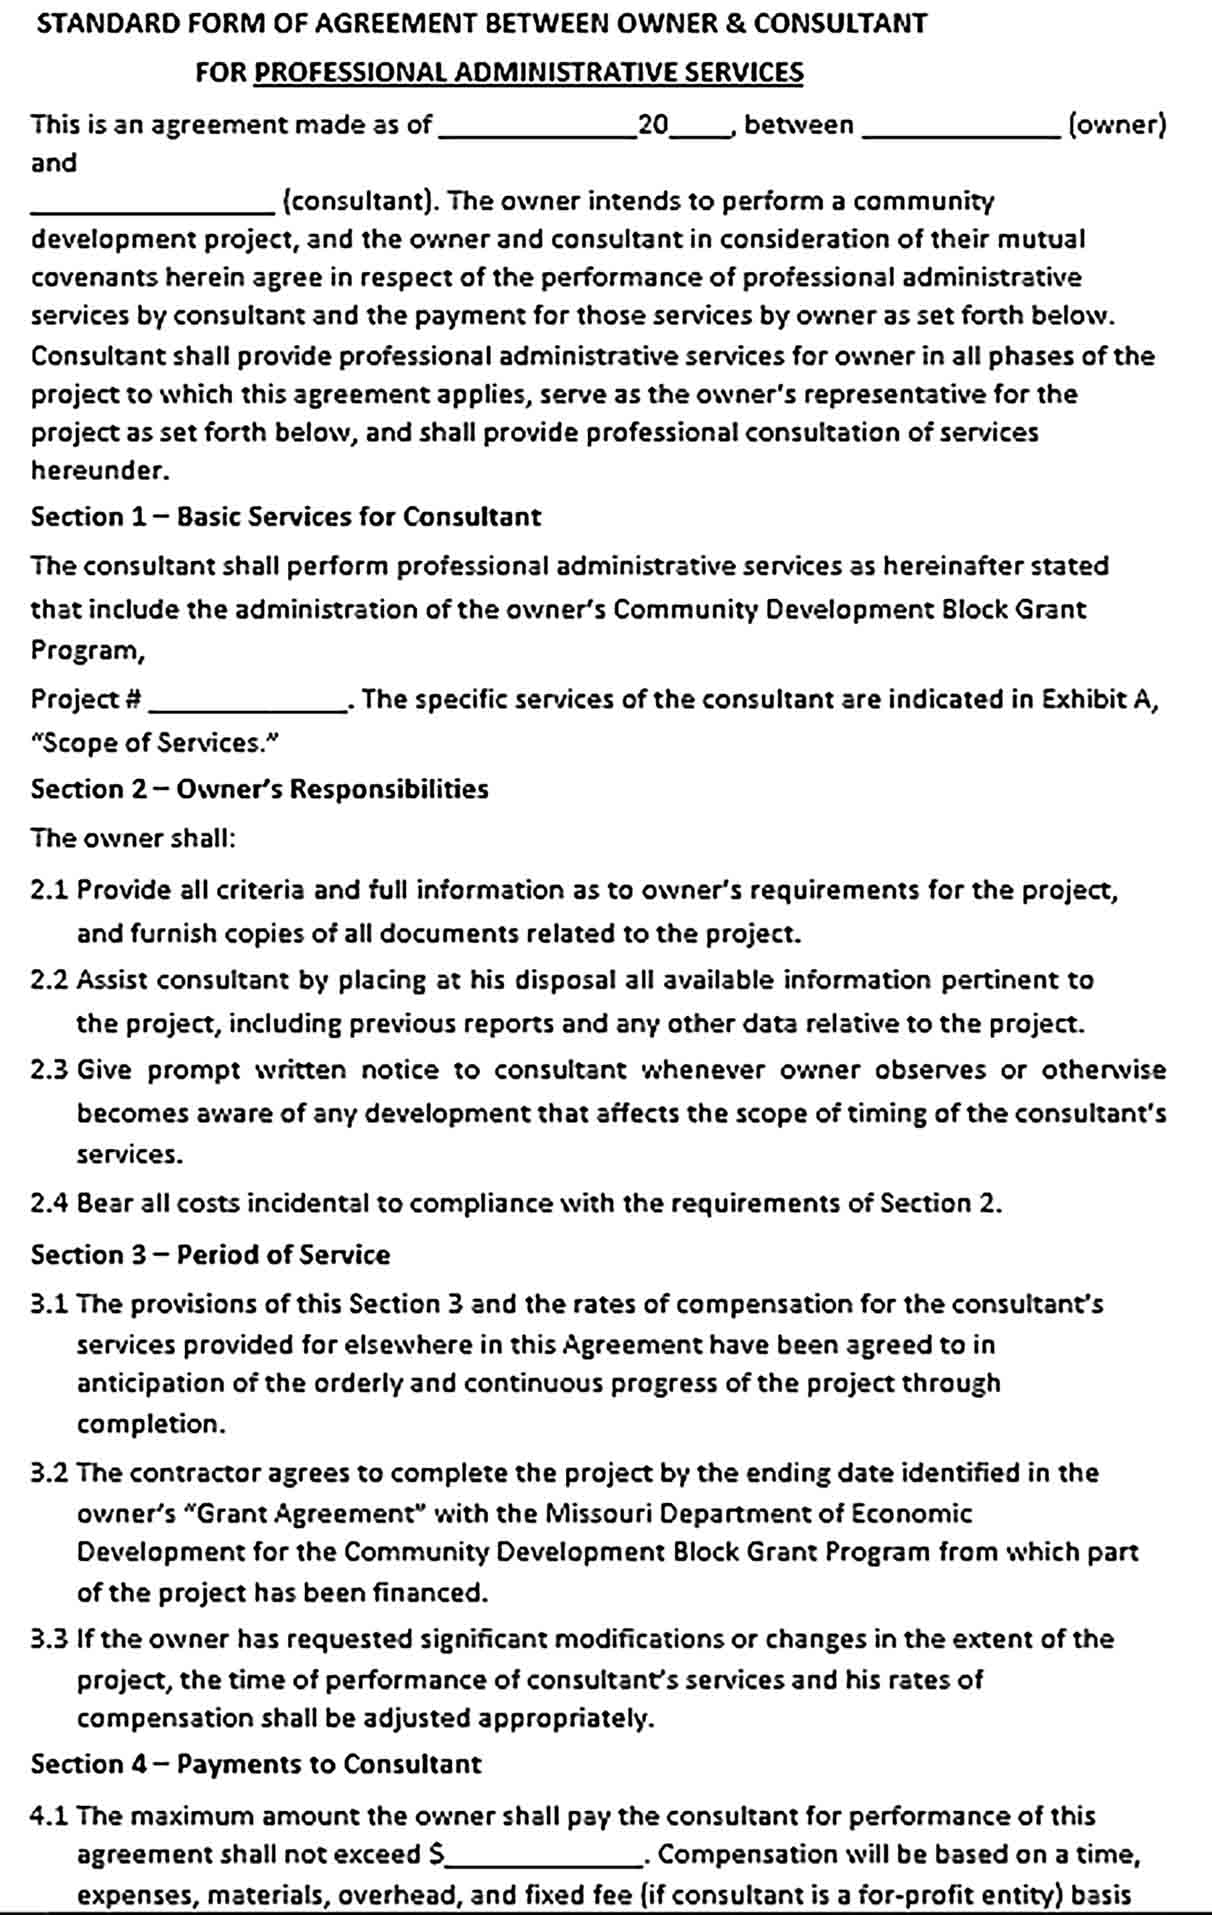 Sample Professional Administrative Services Agreement